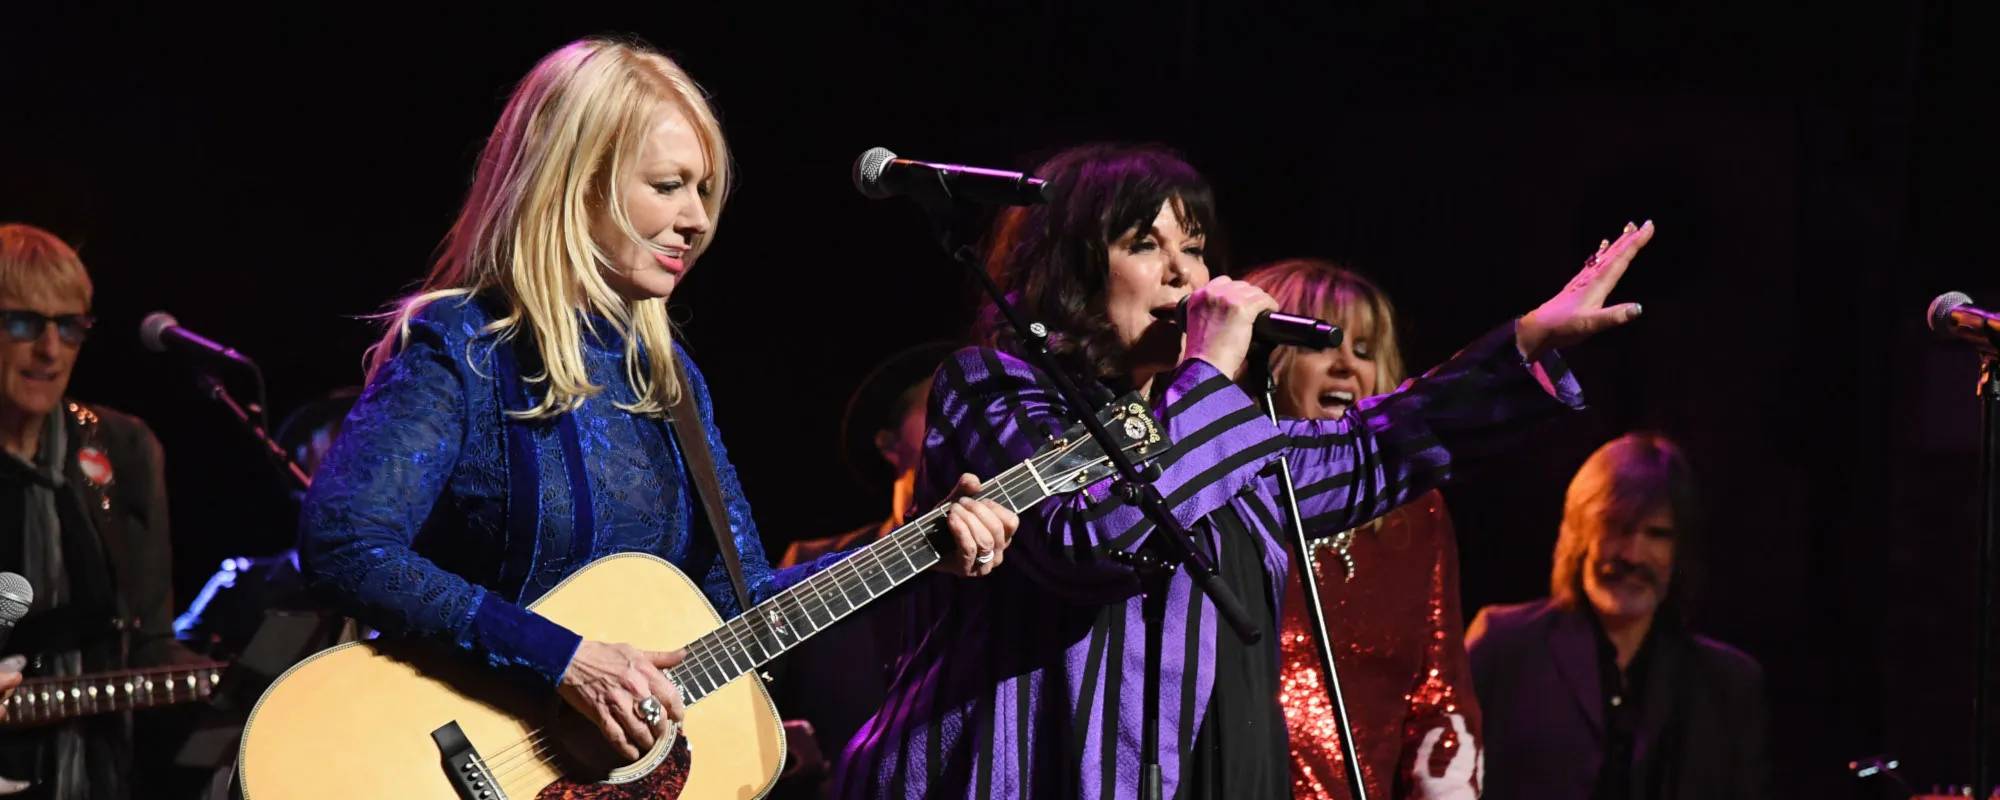 Watch: Nancy Wilson and Ann Wilson Perform Together for First Time Since 2019